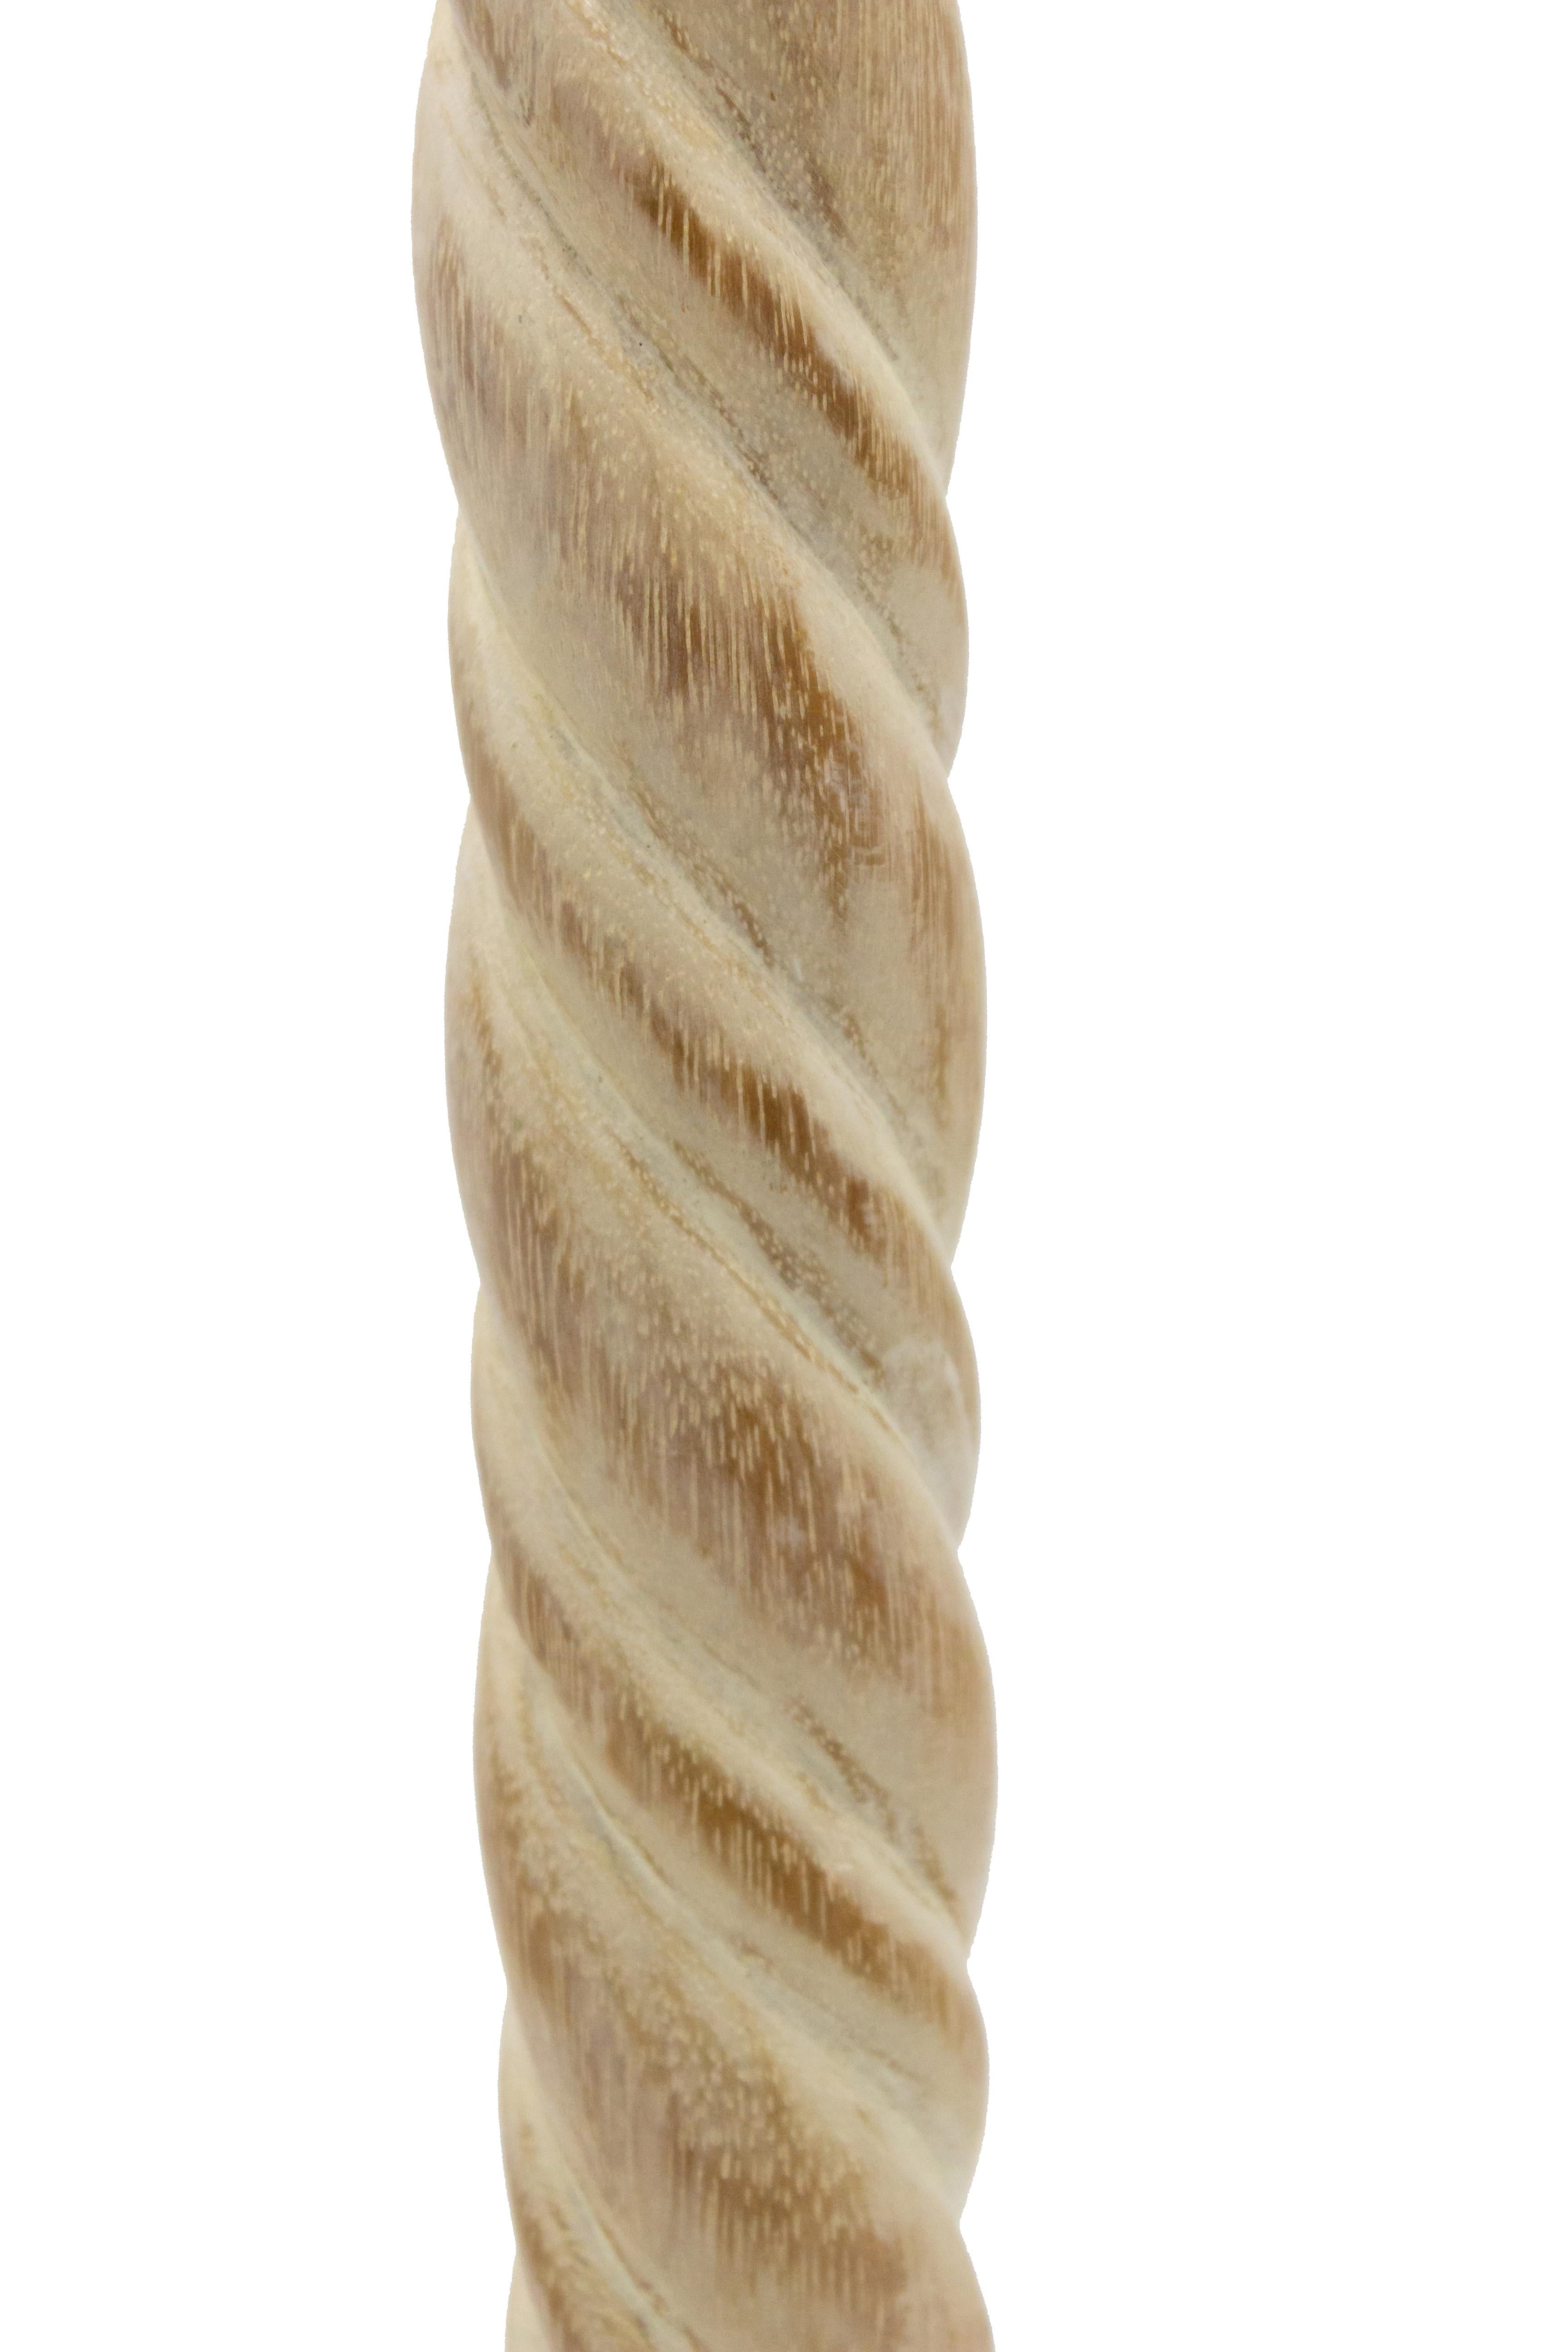 Maitland Smith MidCentury Bleached Wood Spiral Table Lamps In Good Condition For Sale In New York, NY